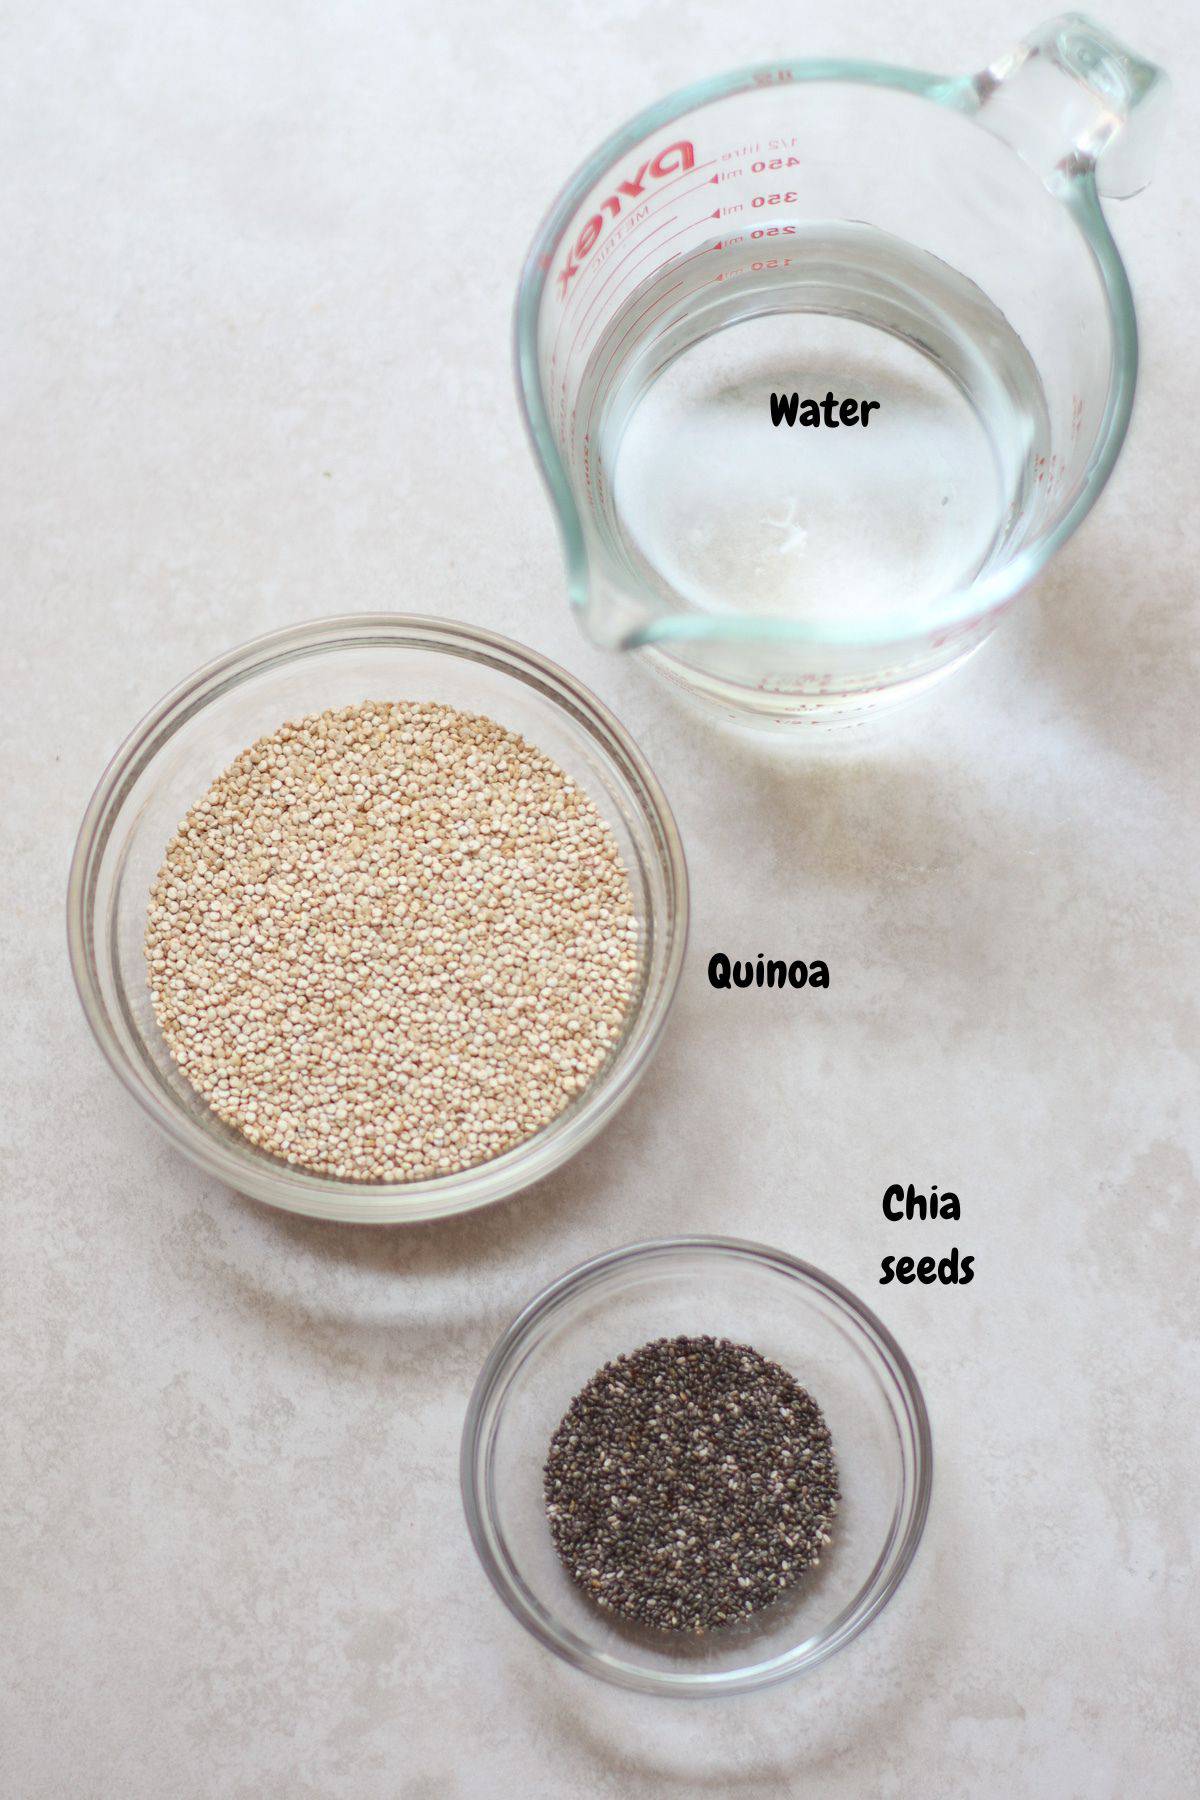 Quinoa, chia seeds, and water.